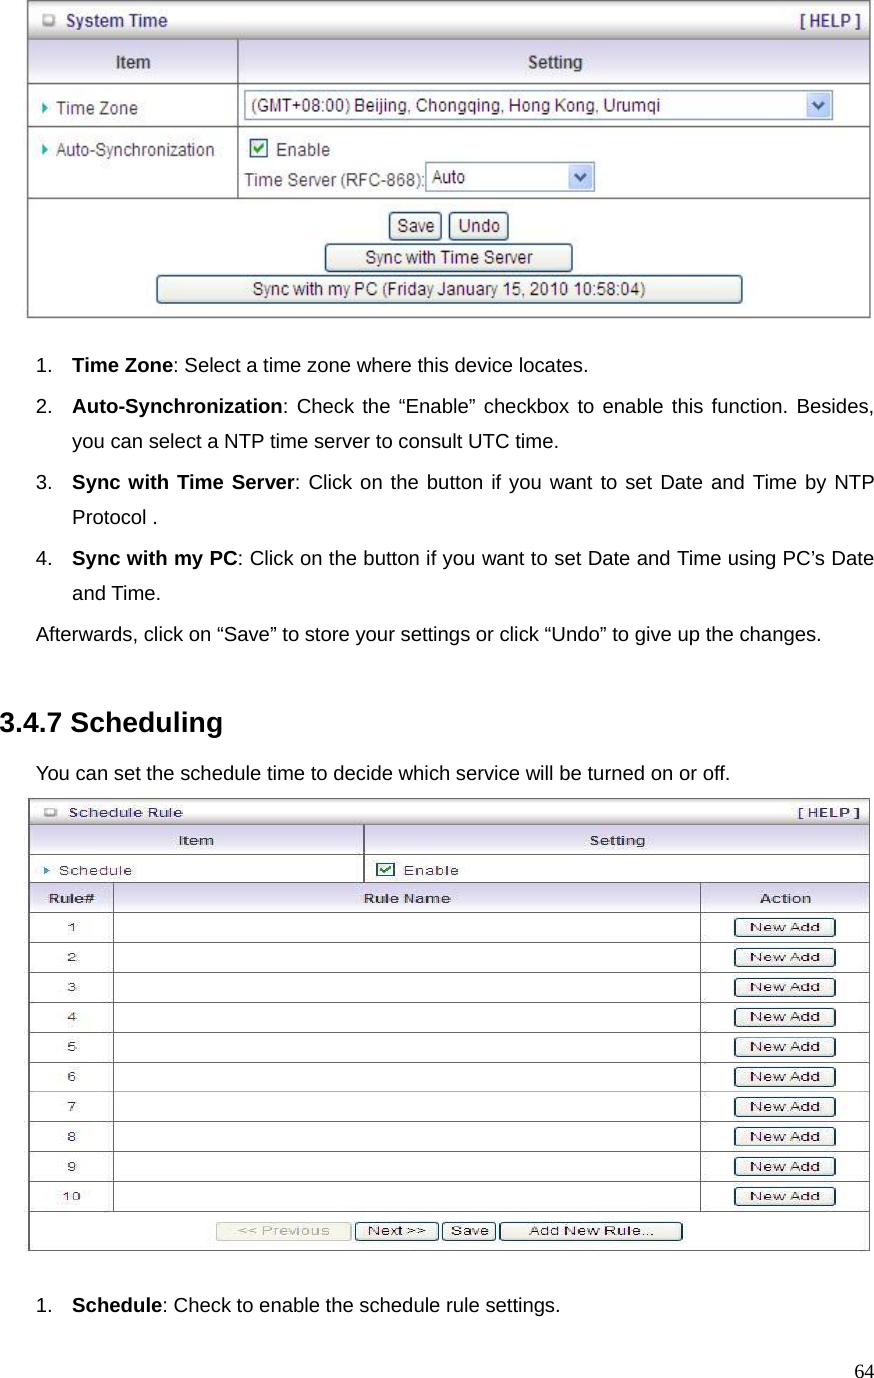  64  1.  Time Zone: Select a time zone where this device locates. 2.  Auto-Synchronization: Check the “Enable” checkbox to enable this function. Besides, you can select a NTP time server to consult UTC time. 3.  Sync with Time Server: Click on the button if you want to set Date and Time by NTP Protocol . 4.  Sync with my PC: Click on the button if you want to set Date and Time using PC’s Date and Time. Afterwards, click on “Save” to store your settings or click “Undo” to give up the changes.   3.4.7 Scheduling  You can set the schedule time to decide which service will be turned on or off.     1.  Schedule: Check to enable the schedule rule settings.   